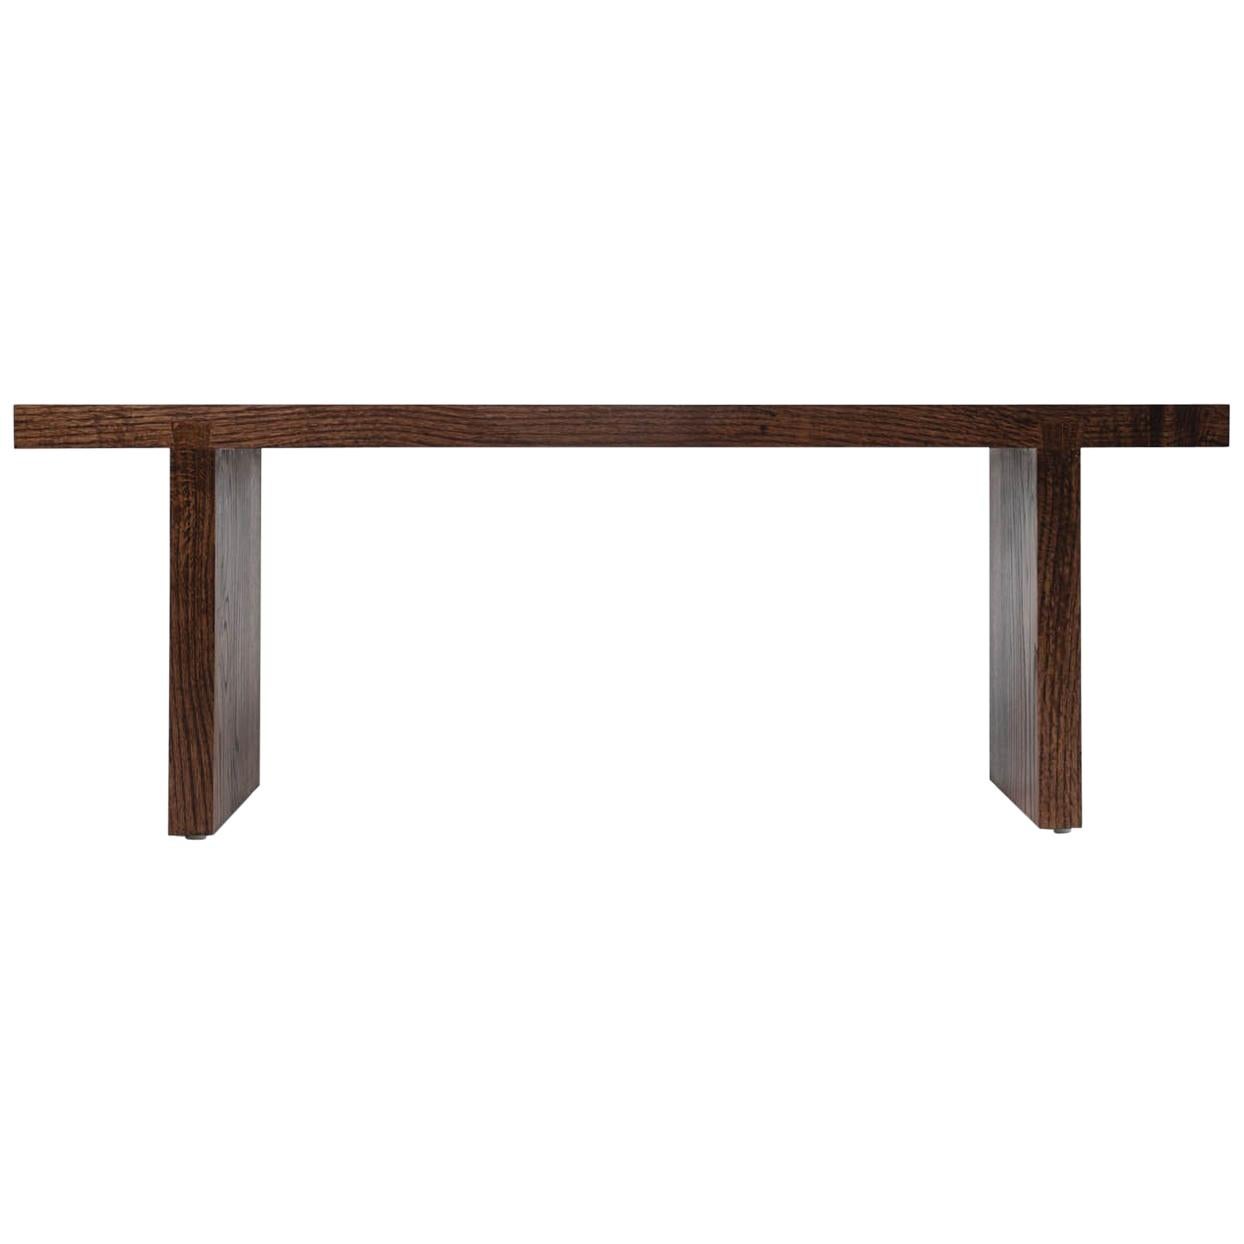 Entryway Bench in Solid Oak - Asian Style Wood Bench - Dark Oak Wood Foot of Bed For Sale